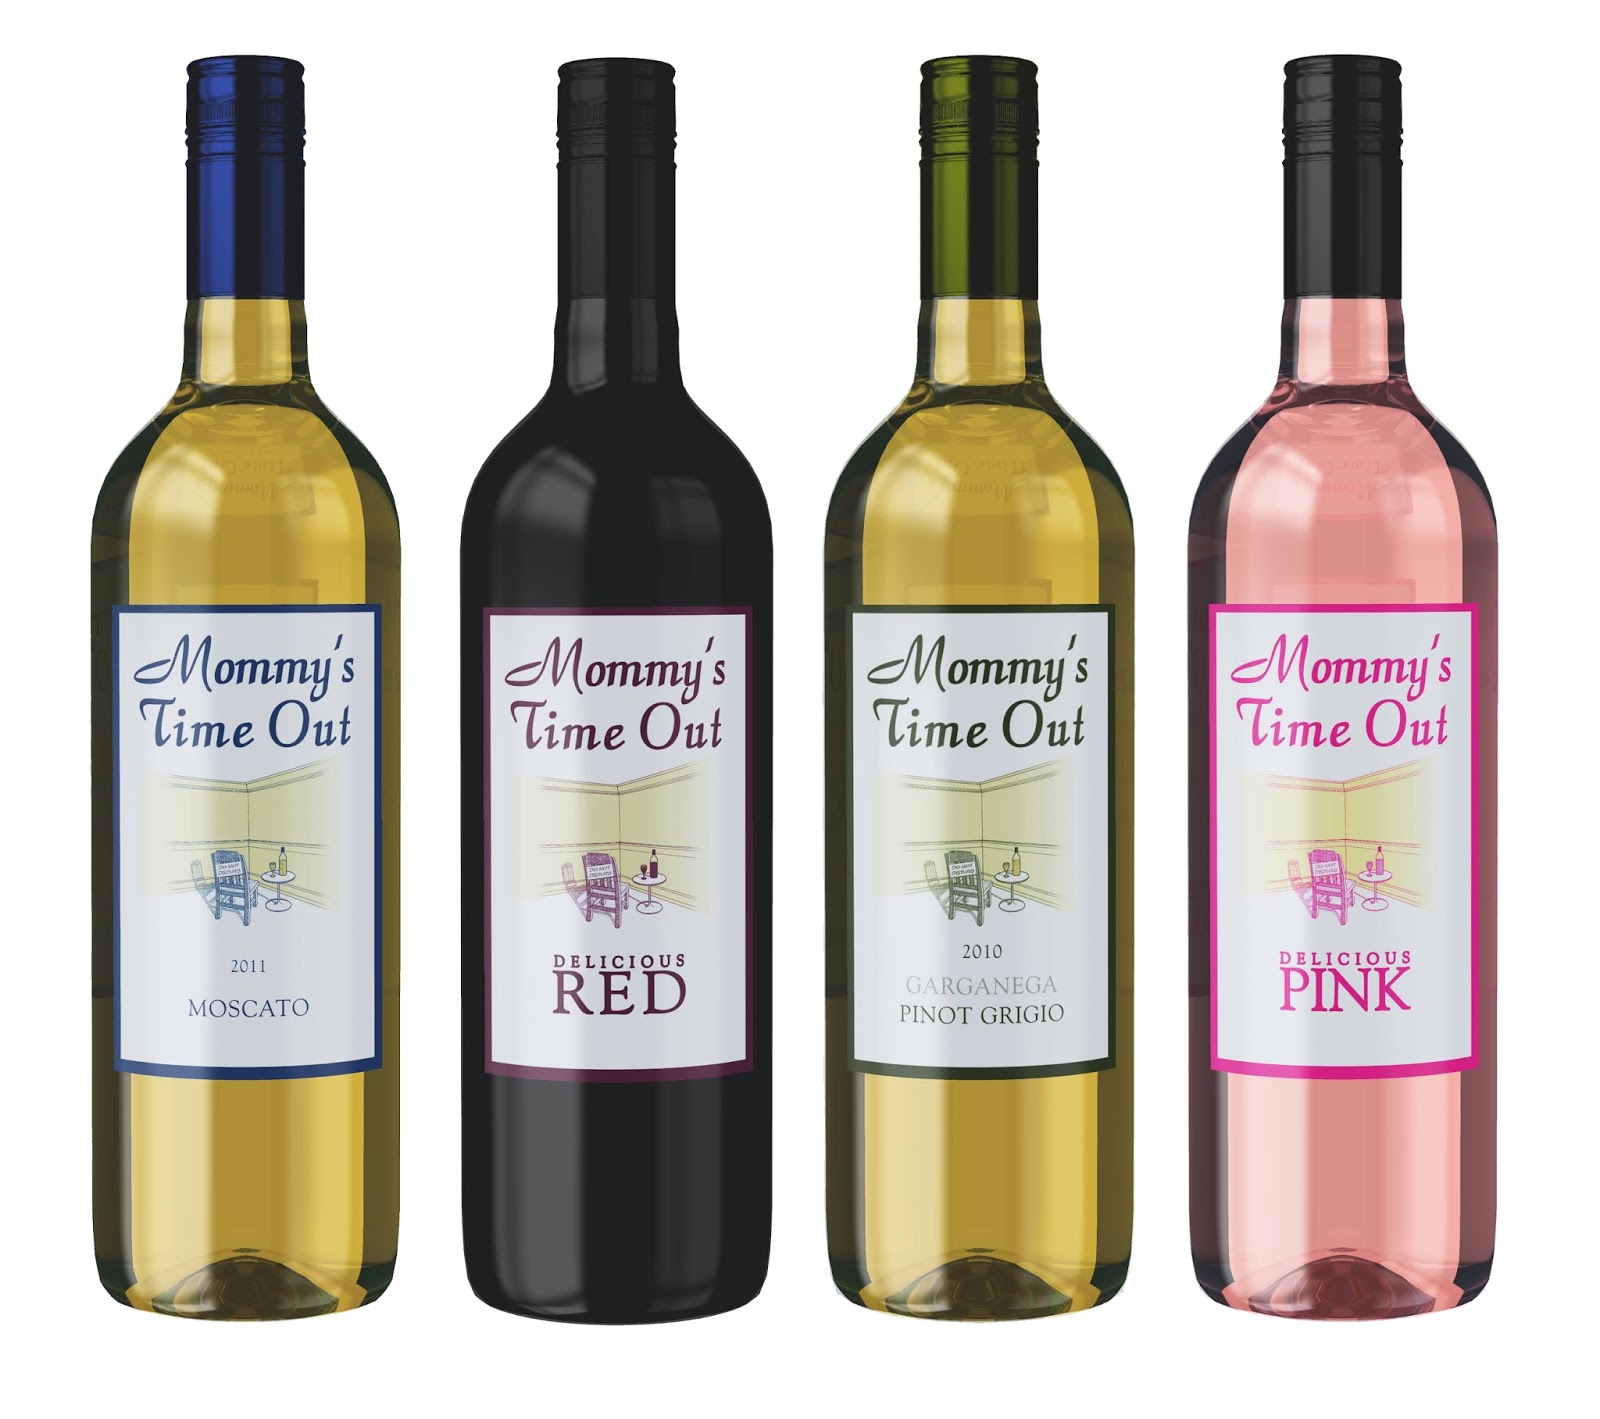 Mommy's Time Out Wine Bottle Logos